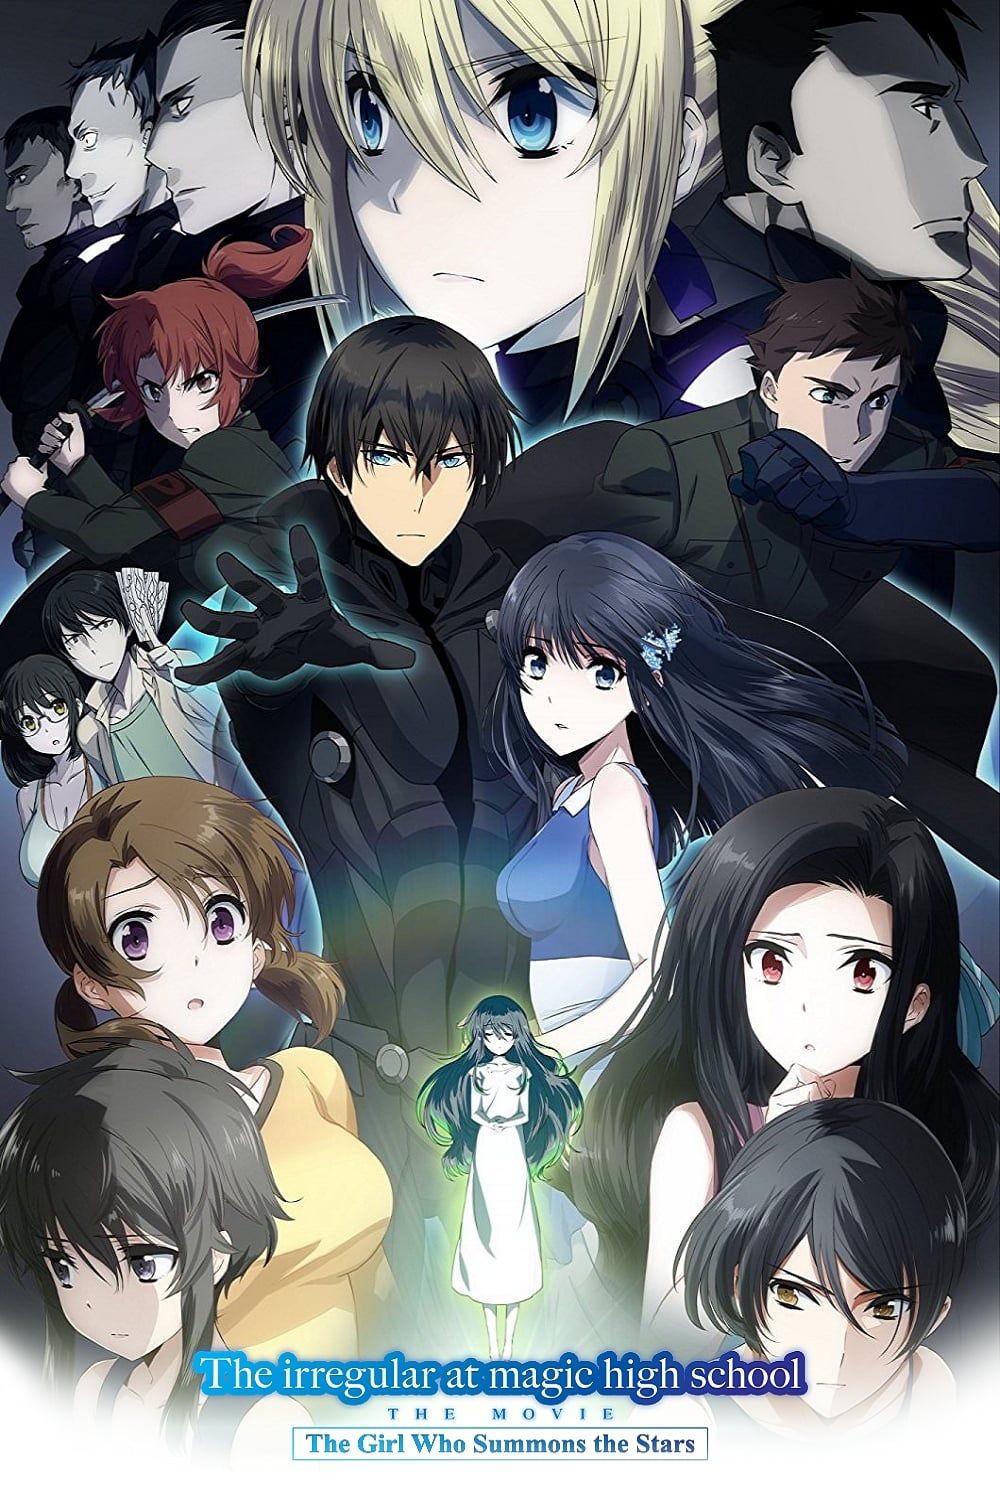 Where To Watch Call Of The Night Anime For Free Online?